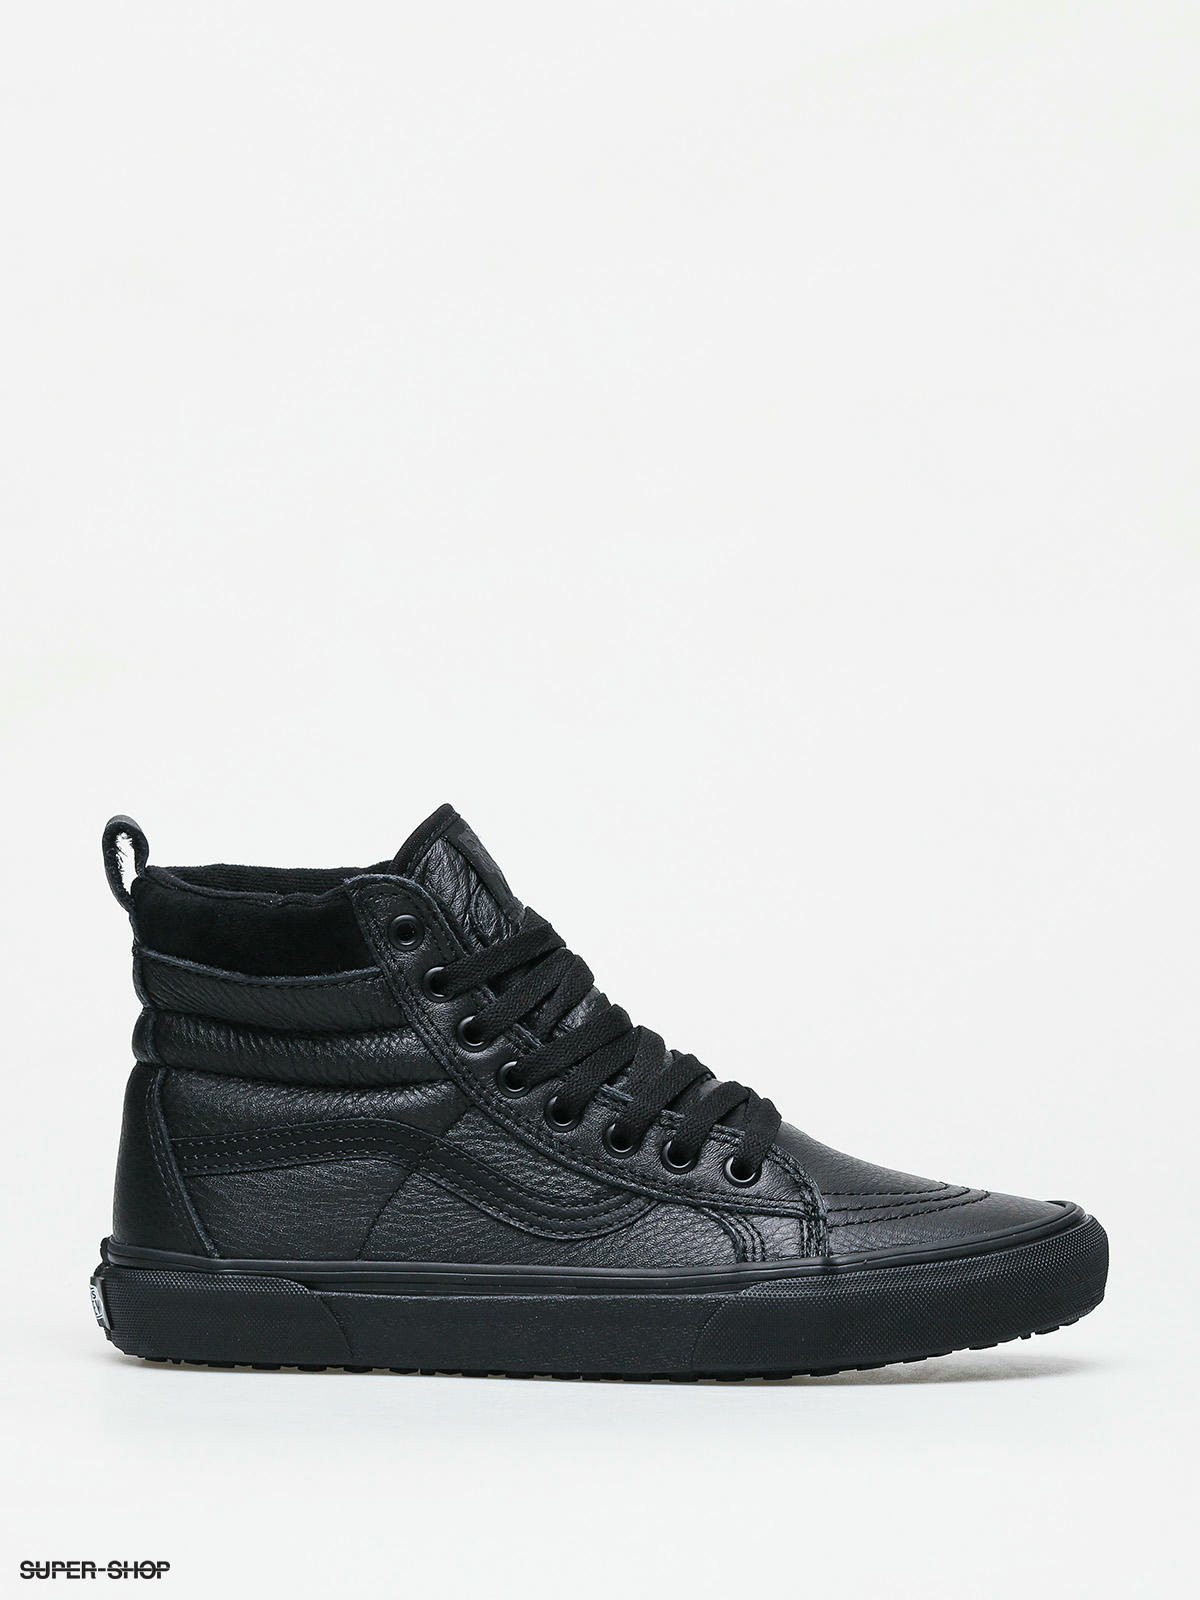 vans all black leather high tops